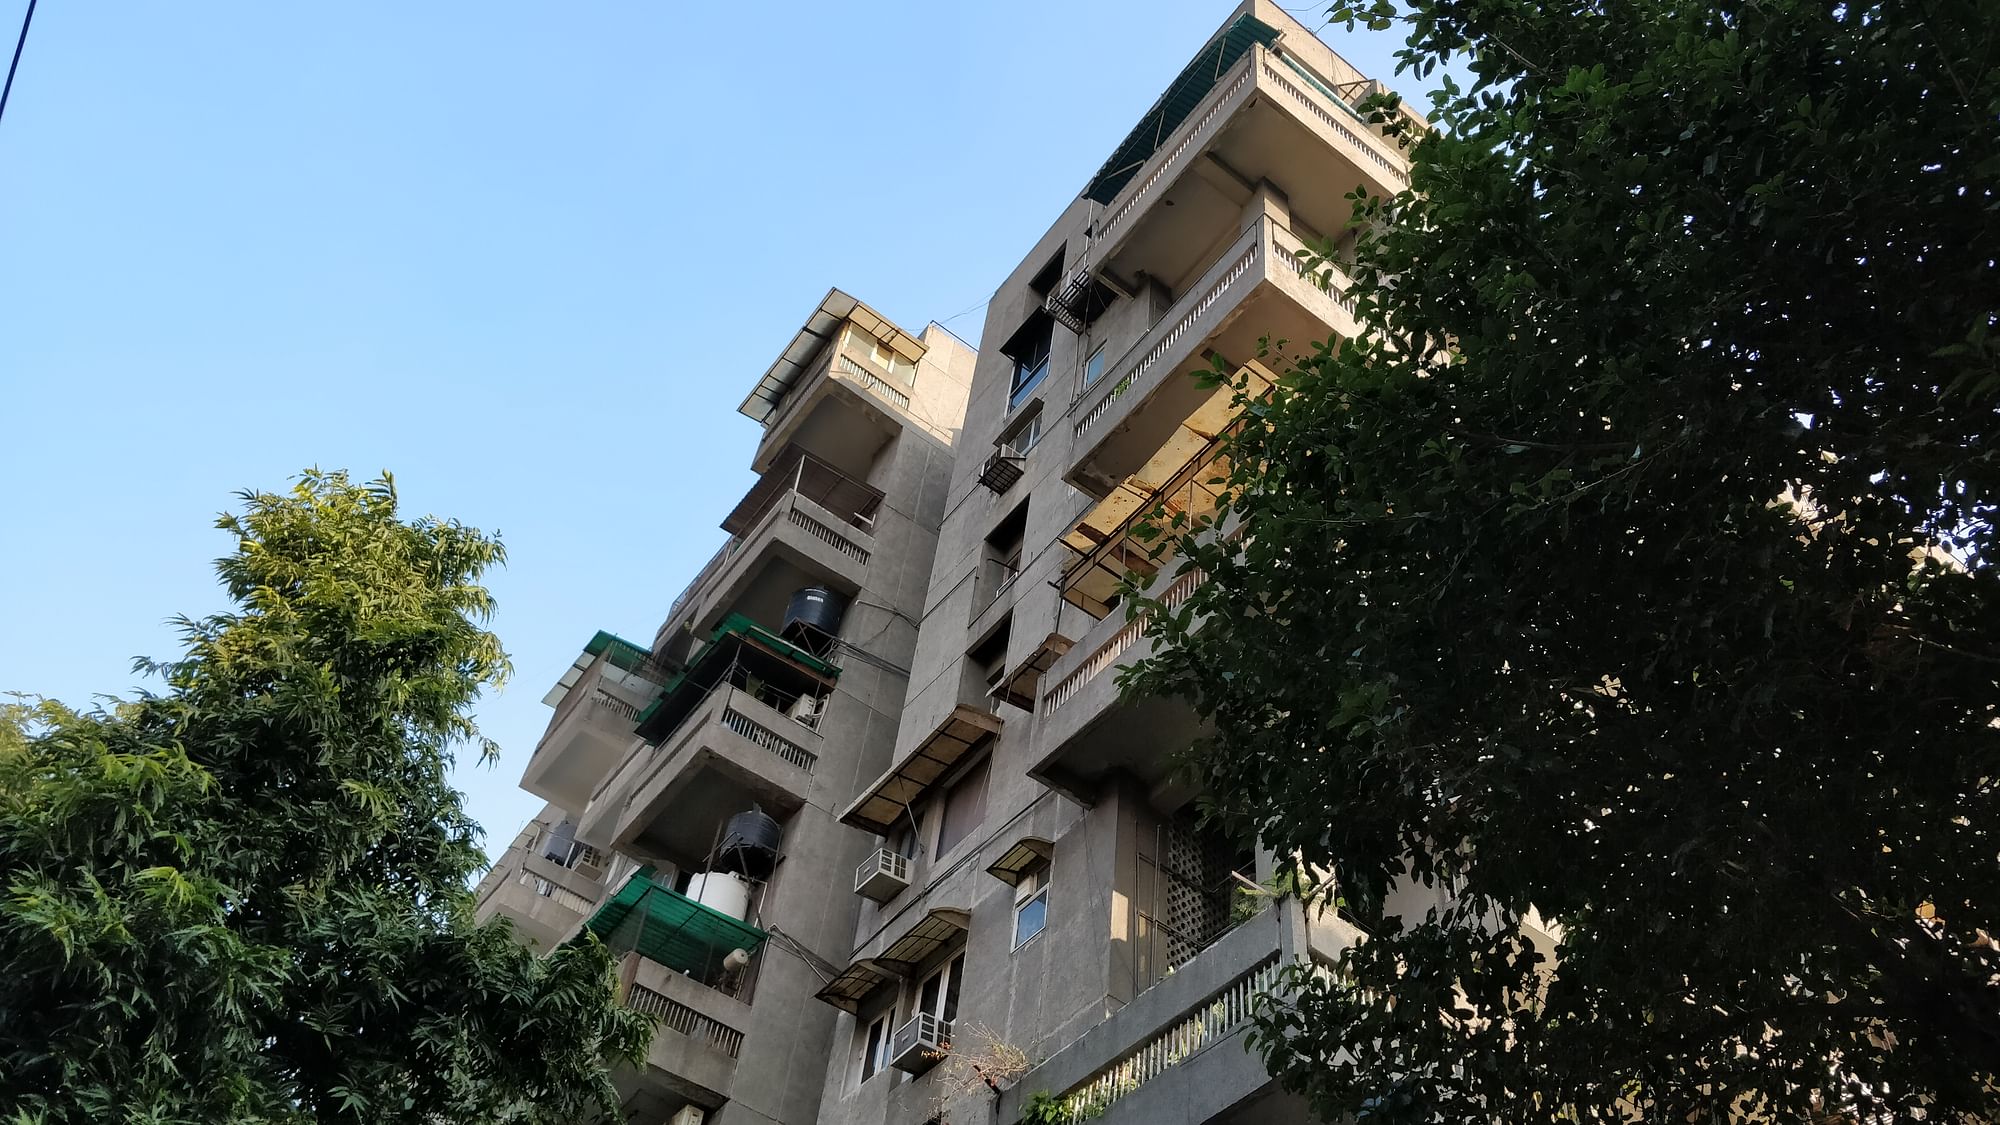 The Mount Kailash Apartment in Delhi, where the elderly couple was found dead.&nbsp;